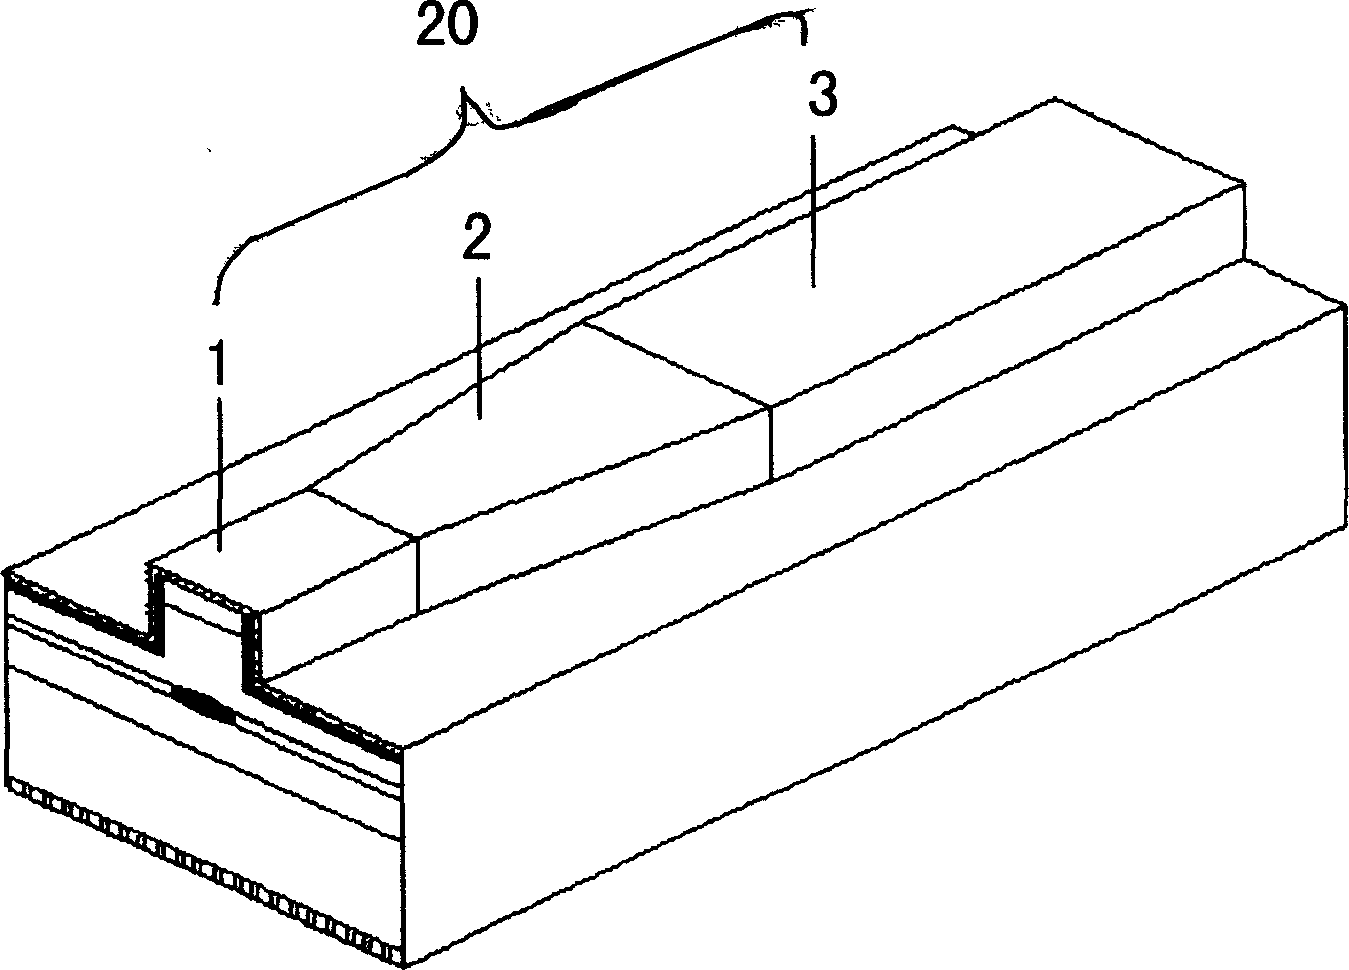 Ridged wave-guiding high-power semiconductor laser structure with conical gain zone